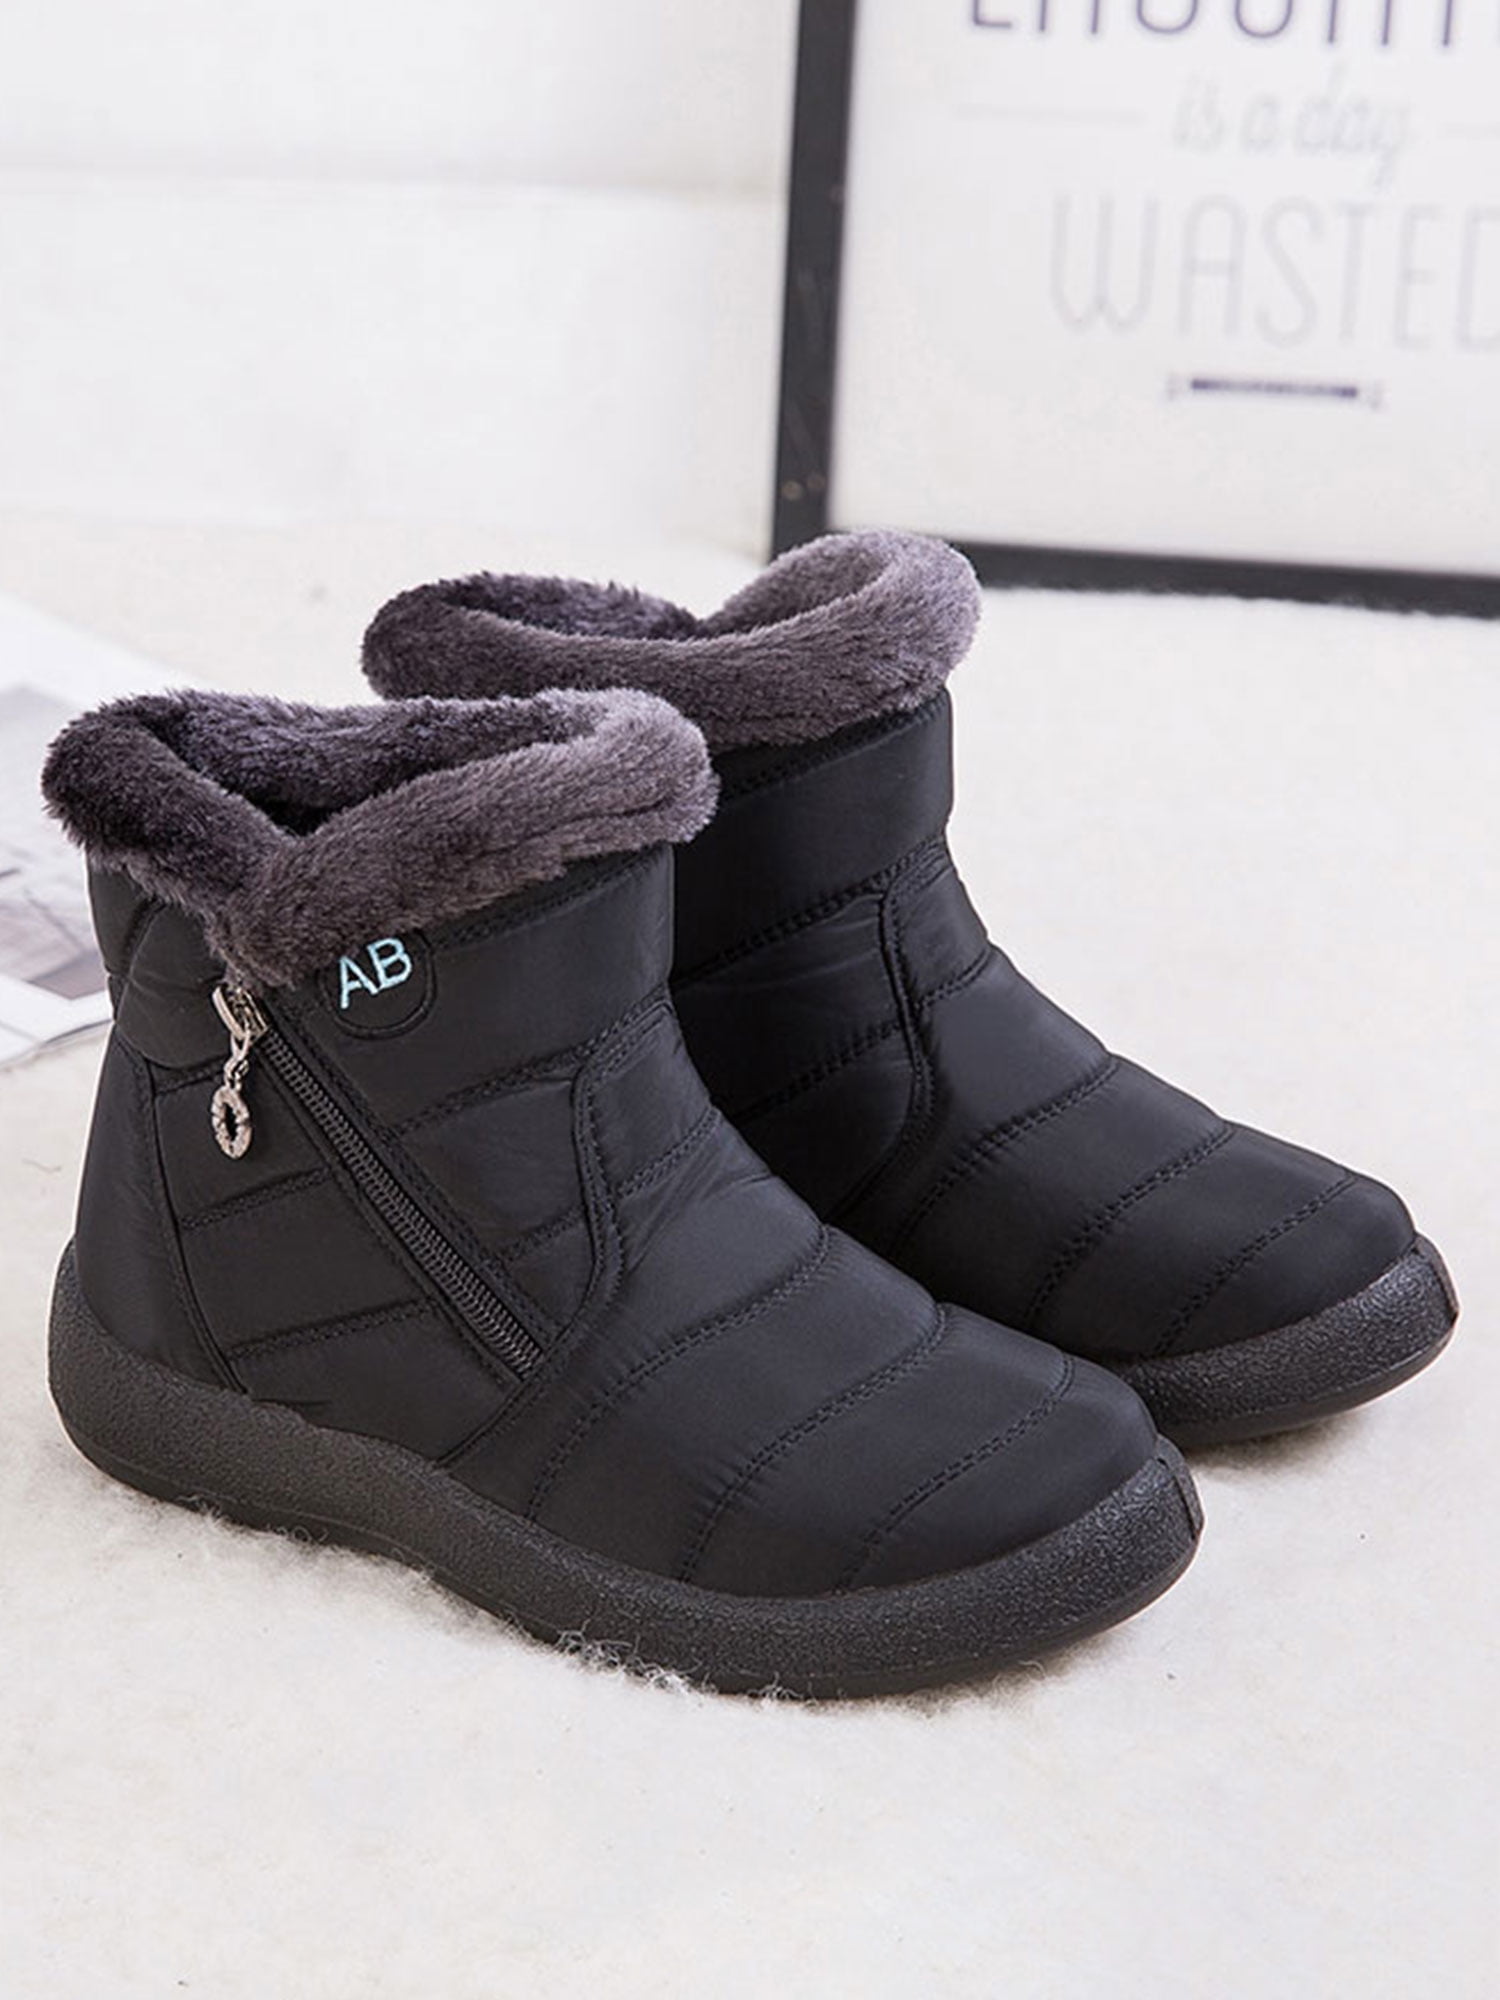 Details about   Women's Waterproof Snow Boots Winter Warm Fur Lined Lace Up Ankle Booties Shoes 